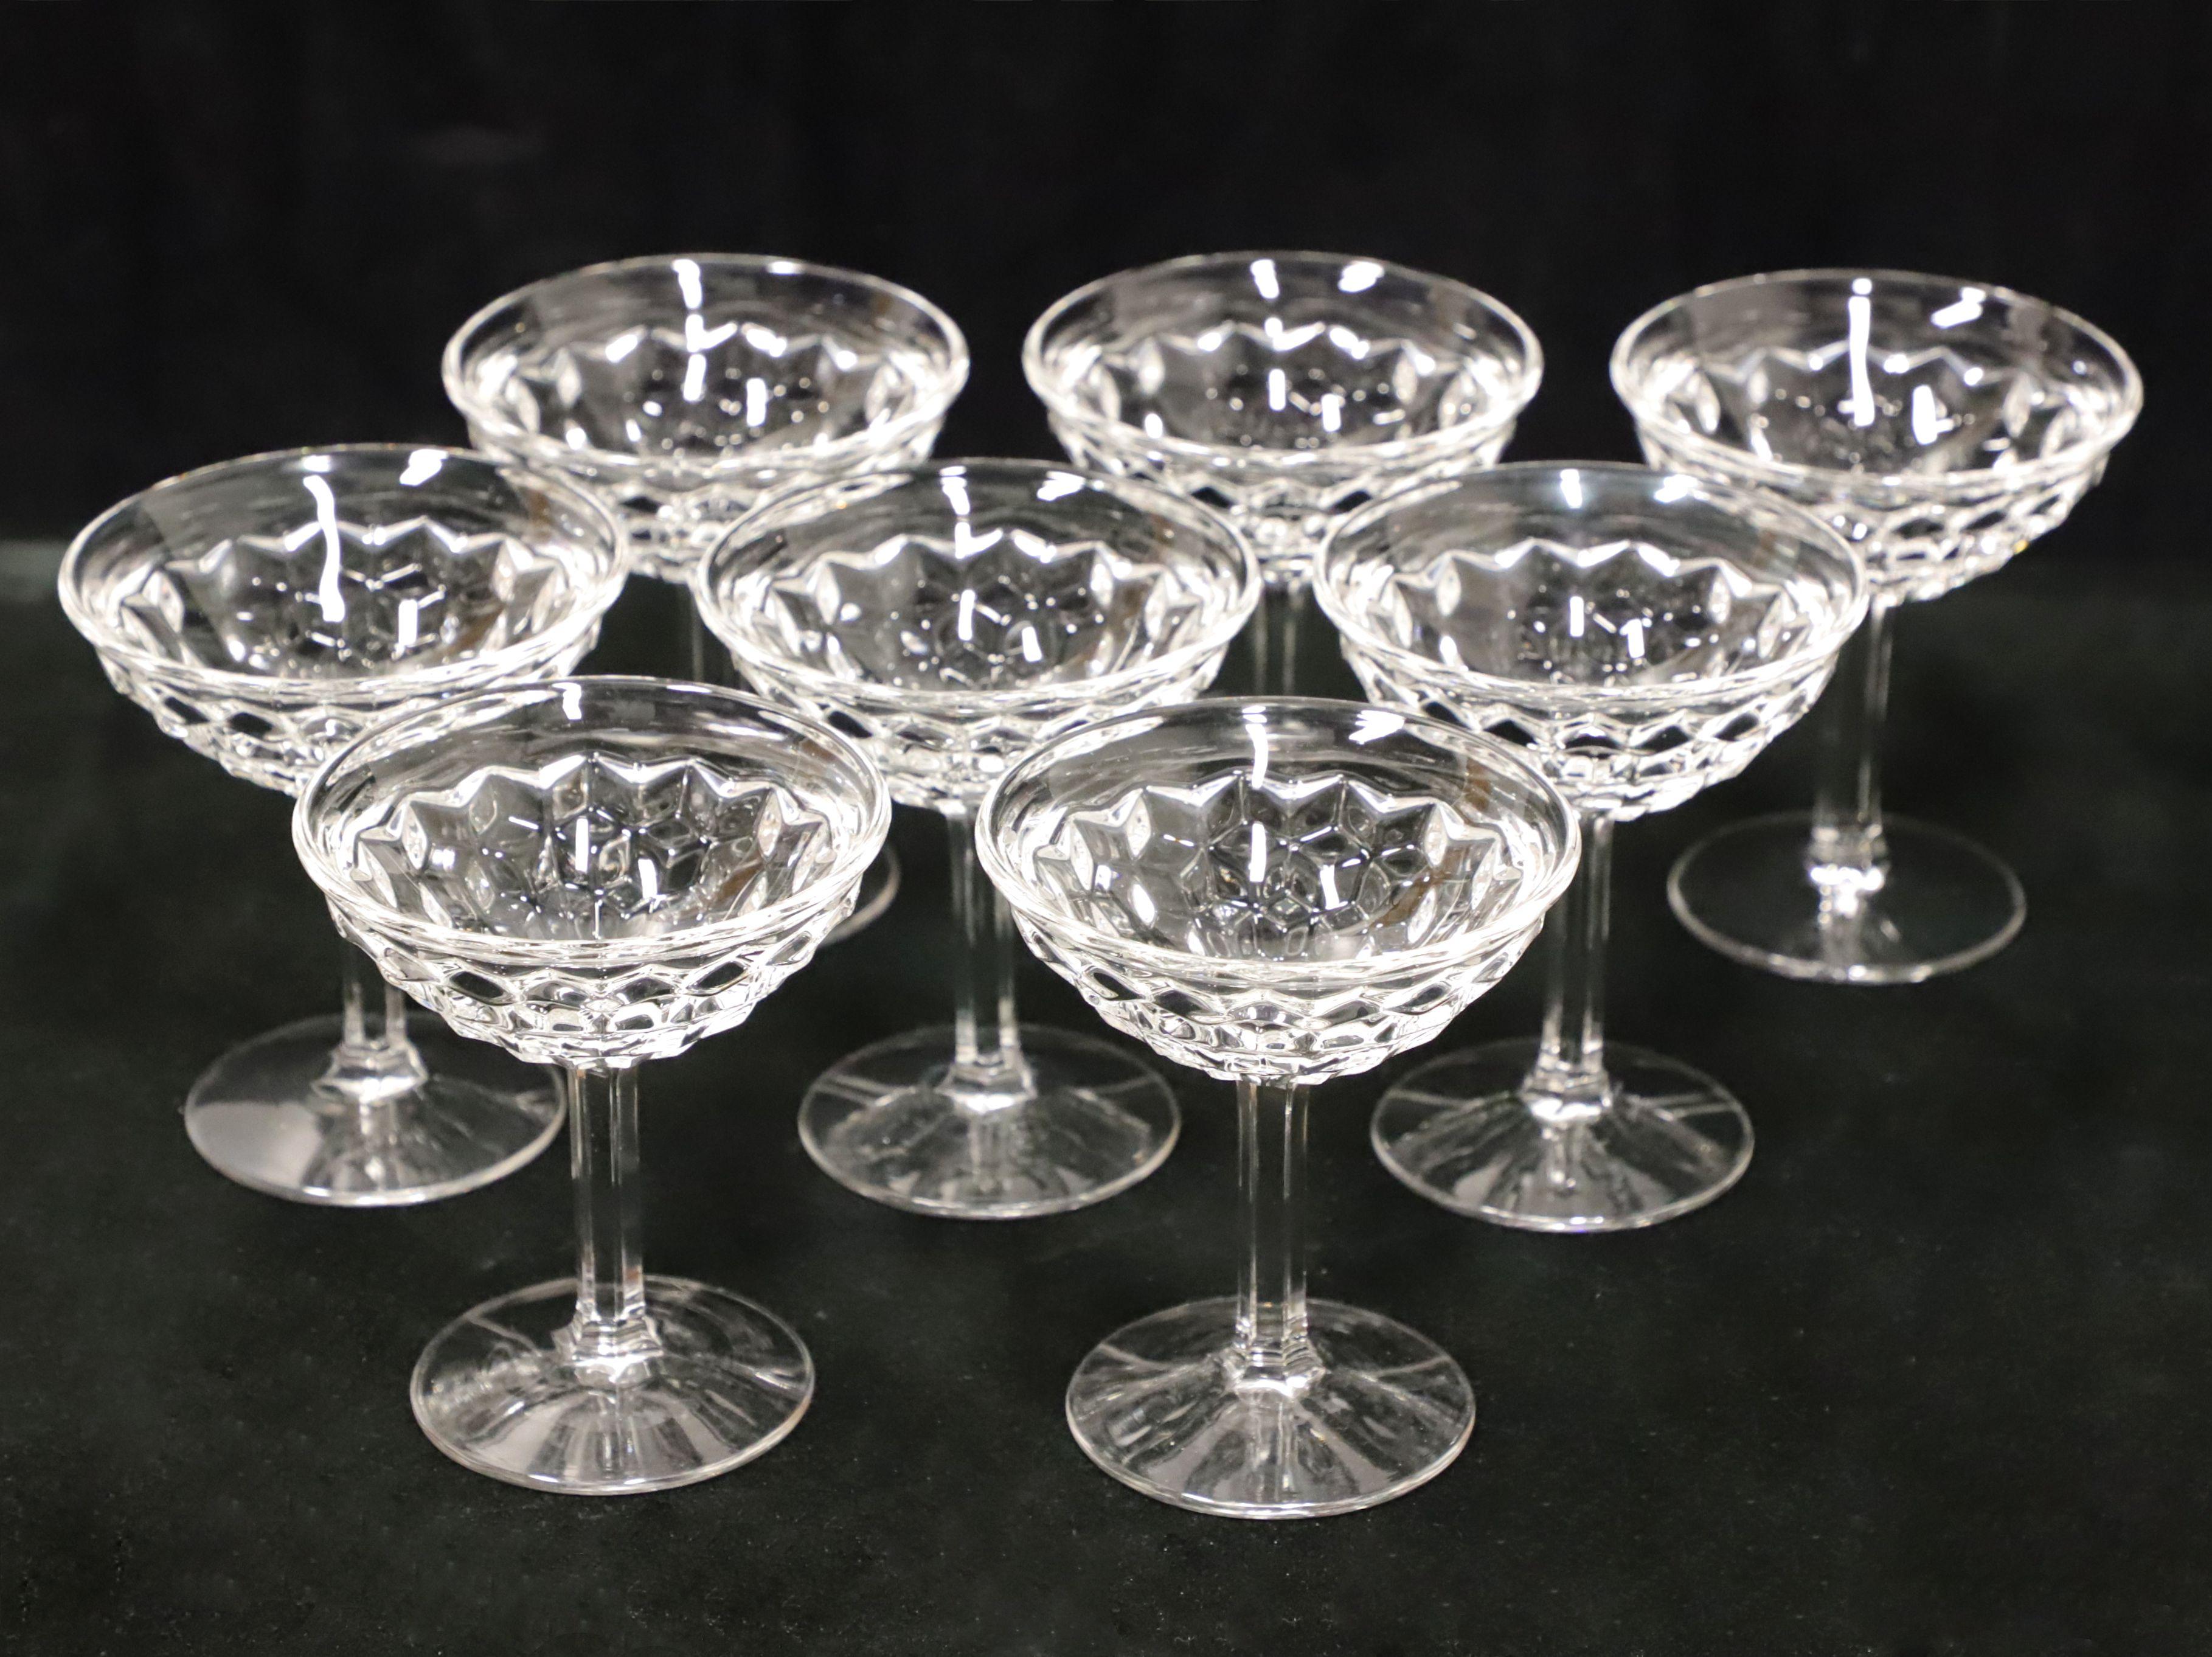 A set of eight sherbet glasses by Fostoria. Each glass has a diamond-like pattern, four inch rim, fluted stem and clear base. Made in the USA, in the mid 20th Century.

Measures: Each Glass: 4w 4d 4.5h, Weighs Approximately: 3 lbs